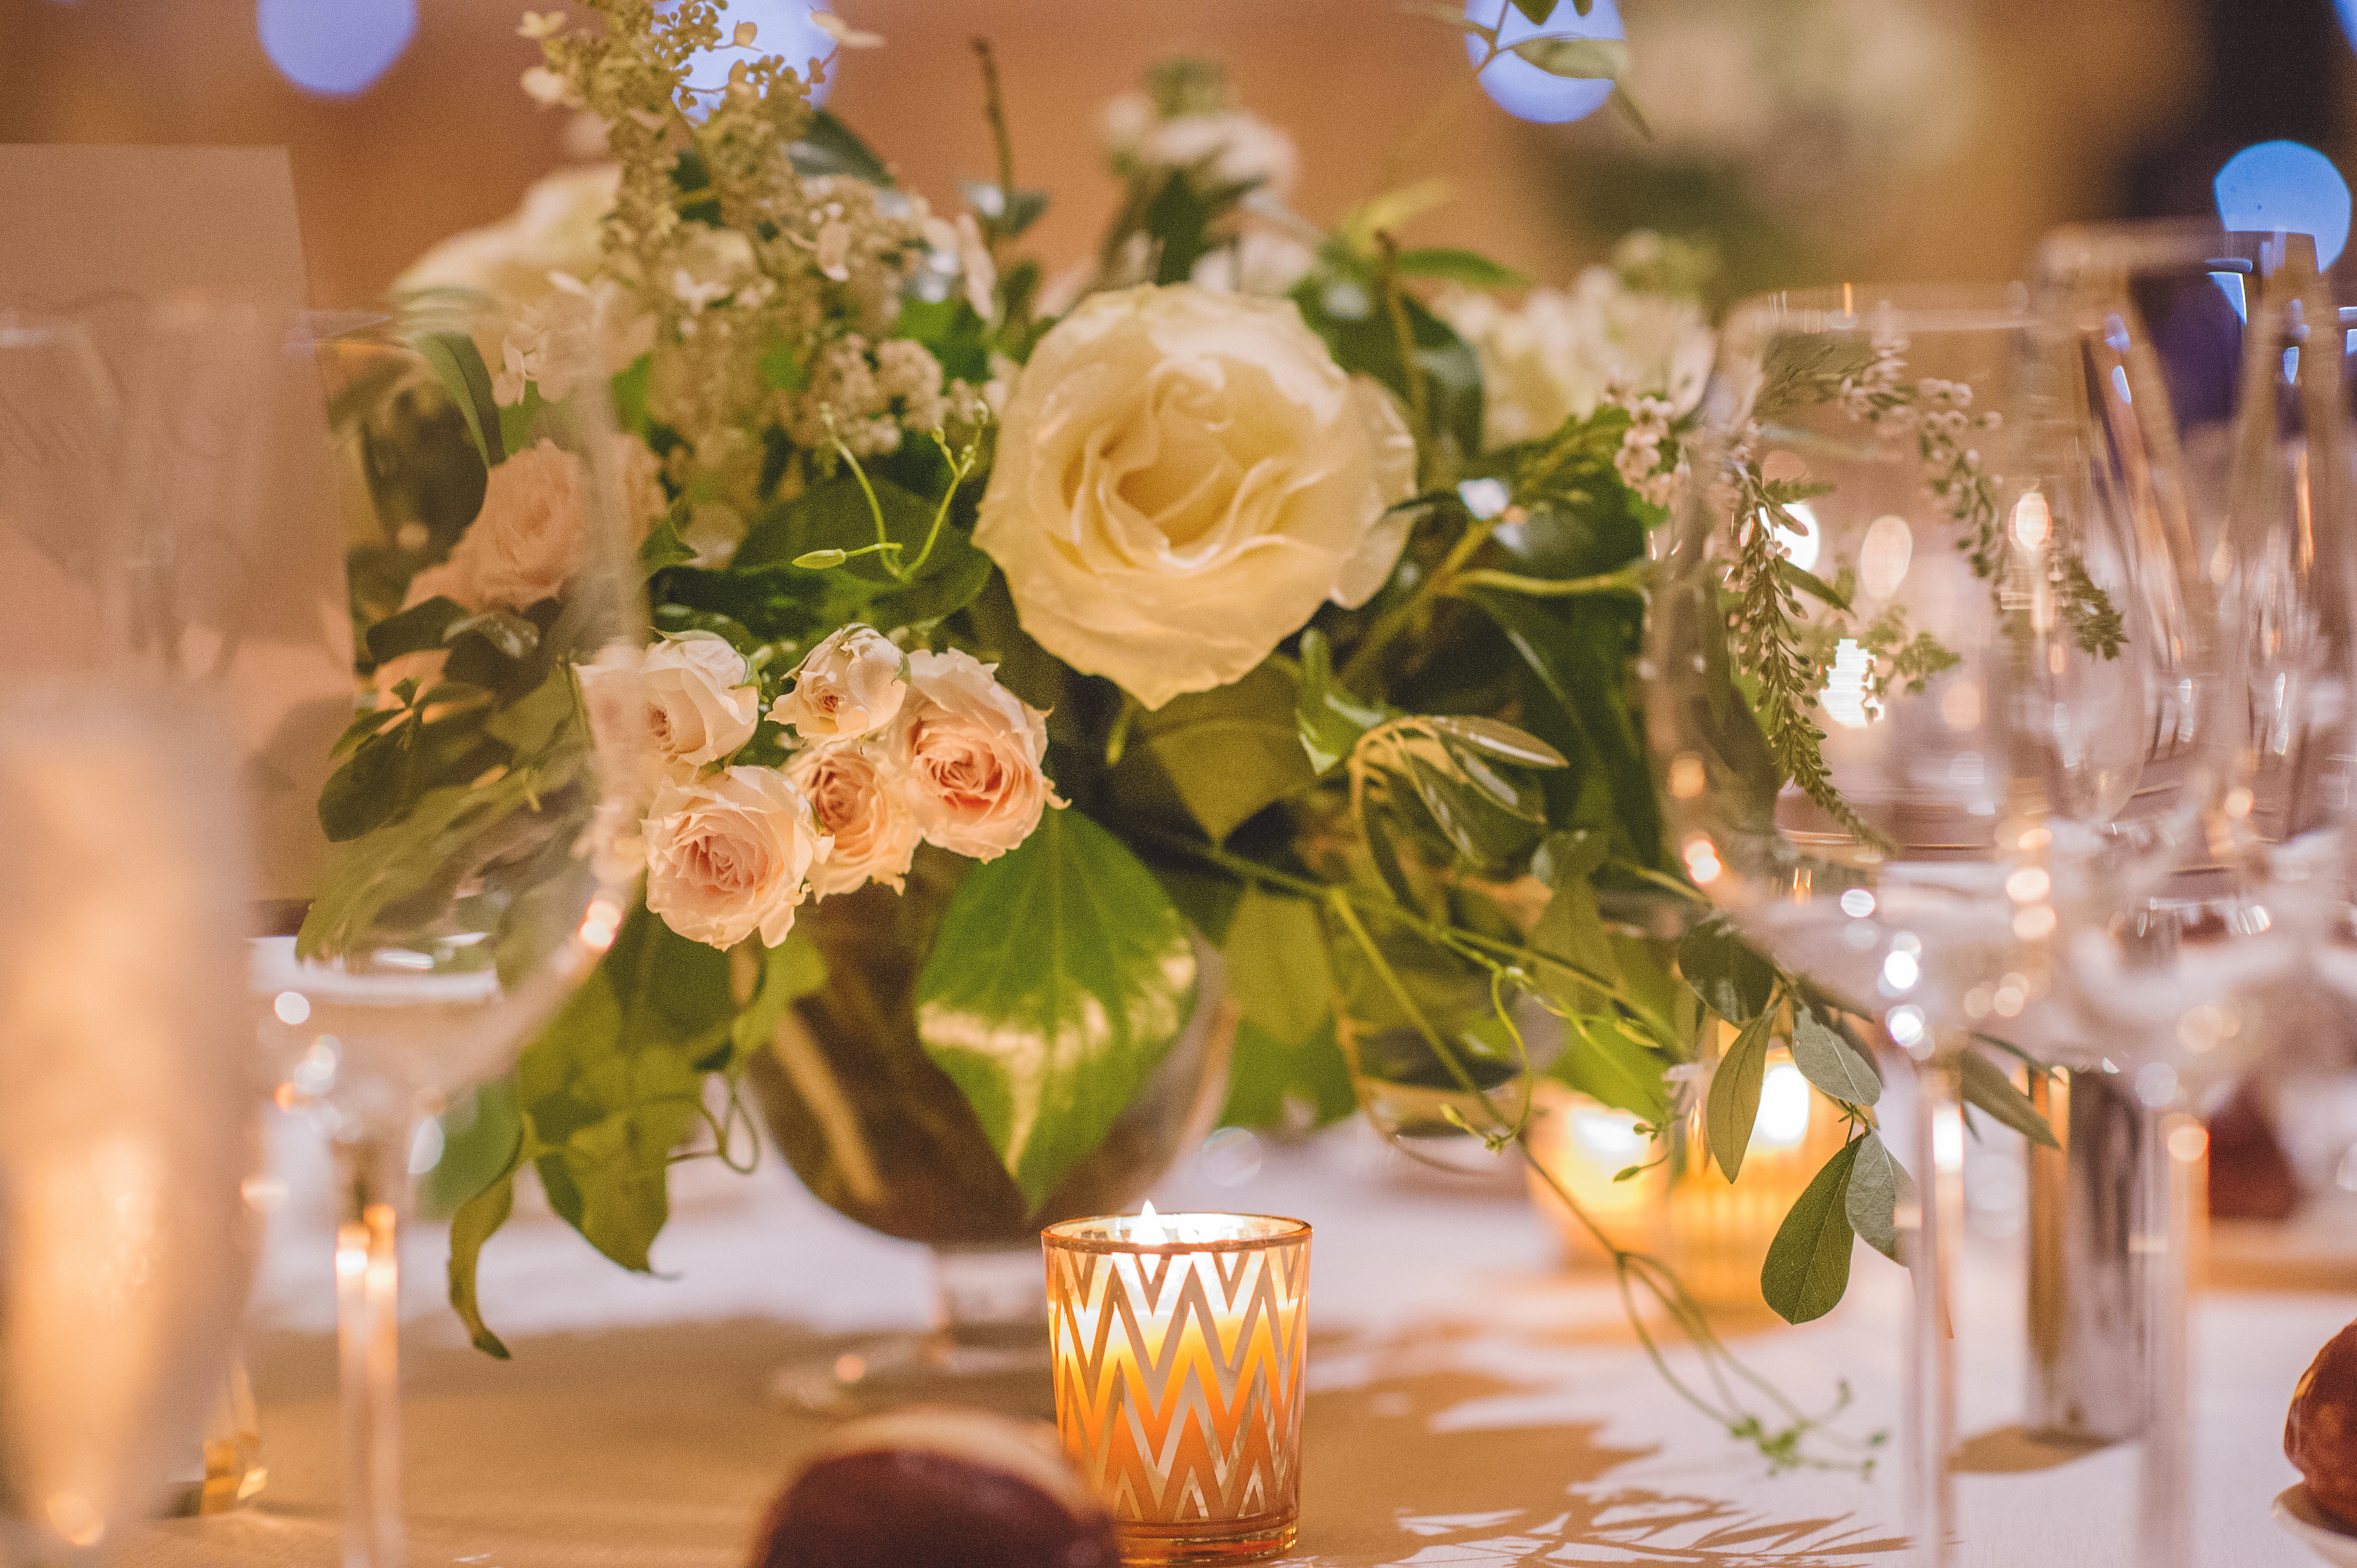 Autumn wedding reception room with classic ivory and blush arrangements with garden roses at JW Marriott Chicago.